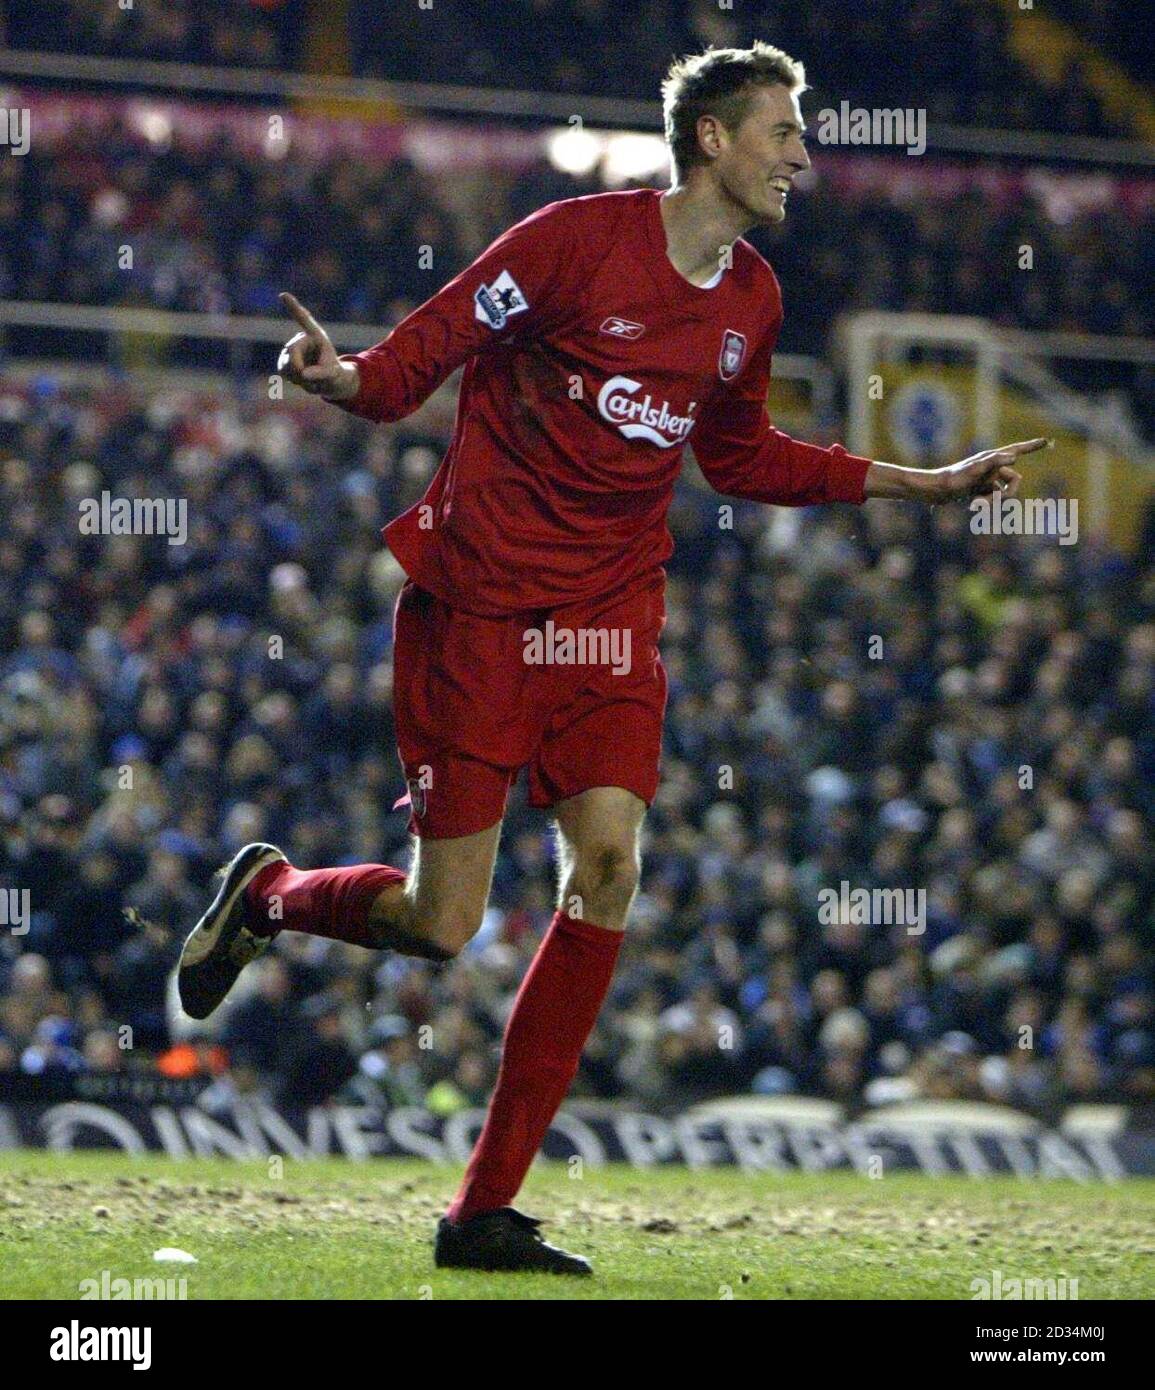 Liverpool's Peter Crouch celebrates his second goal against Birmingham City during the FA Cup sixth round match at St Andrews, Birmingham, Tuesday March 21, 2006. PRESS ASSOCIATION Photo. Photo credit should read: Nick Potts/PA. Stock Photo